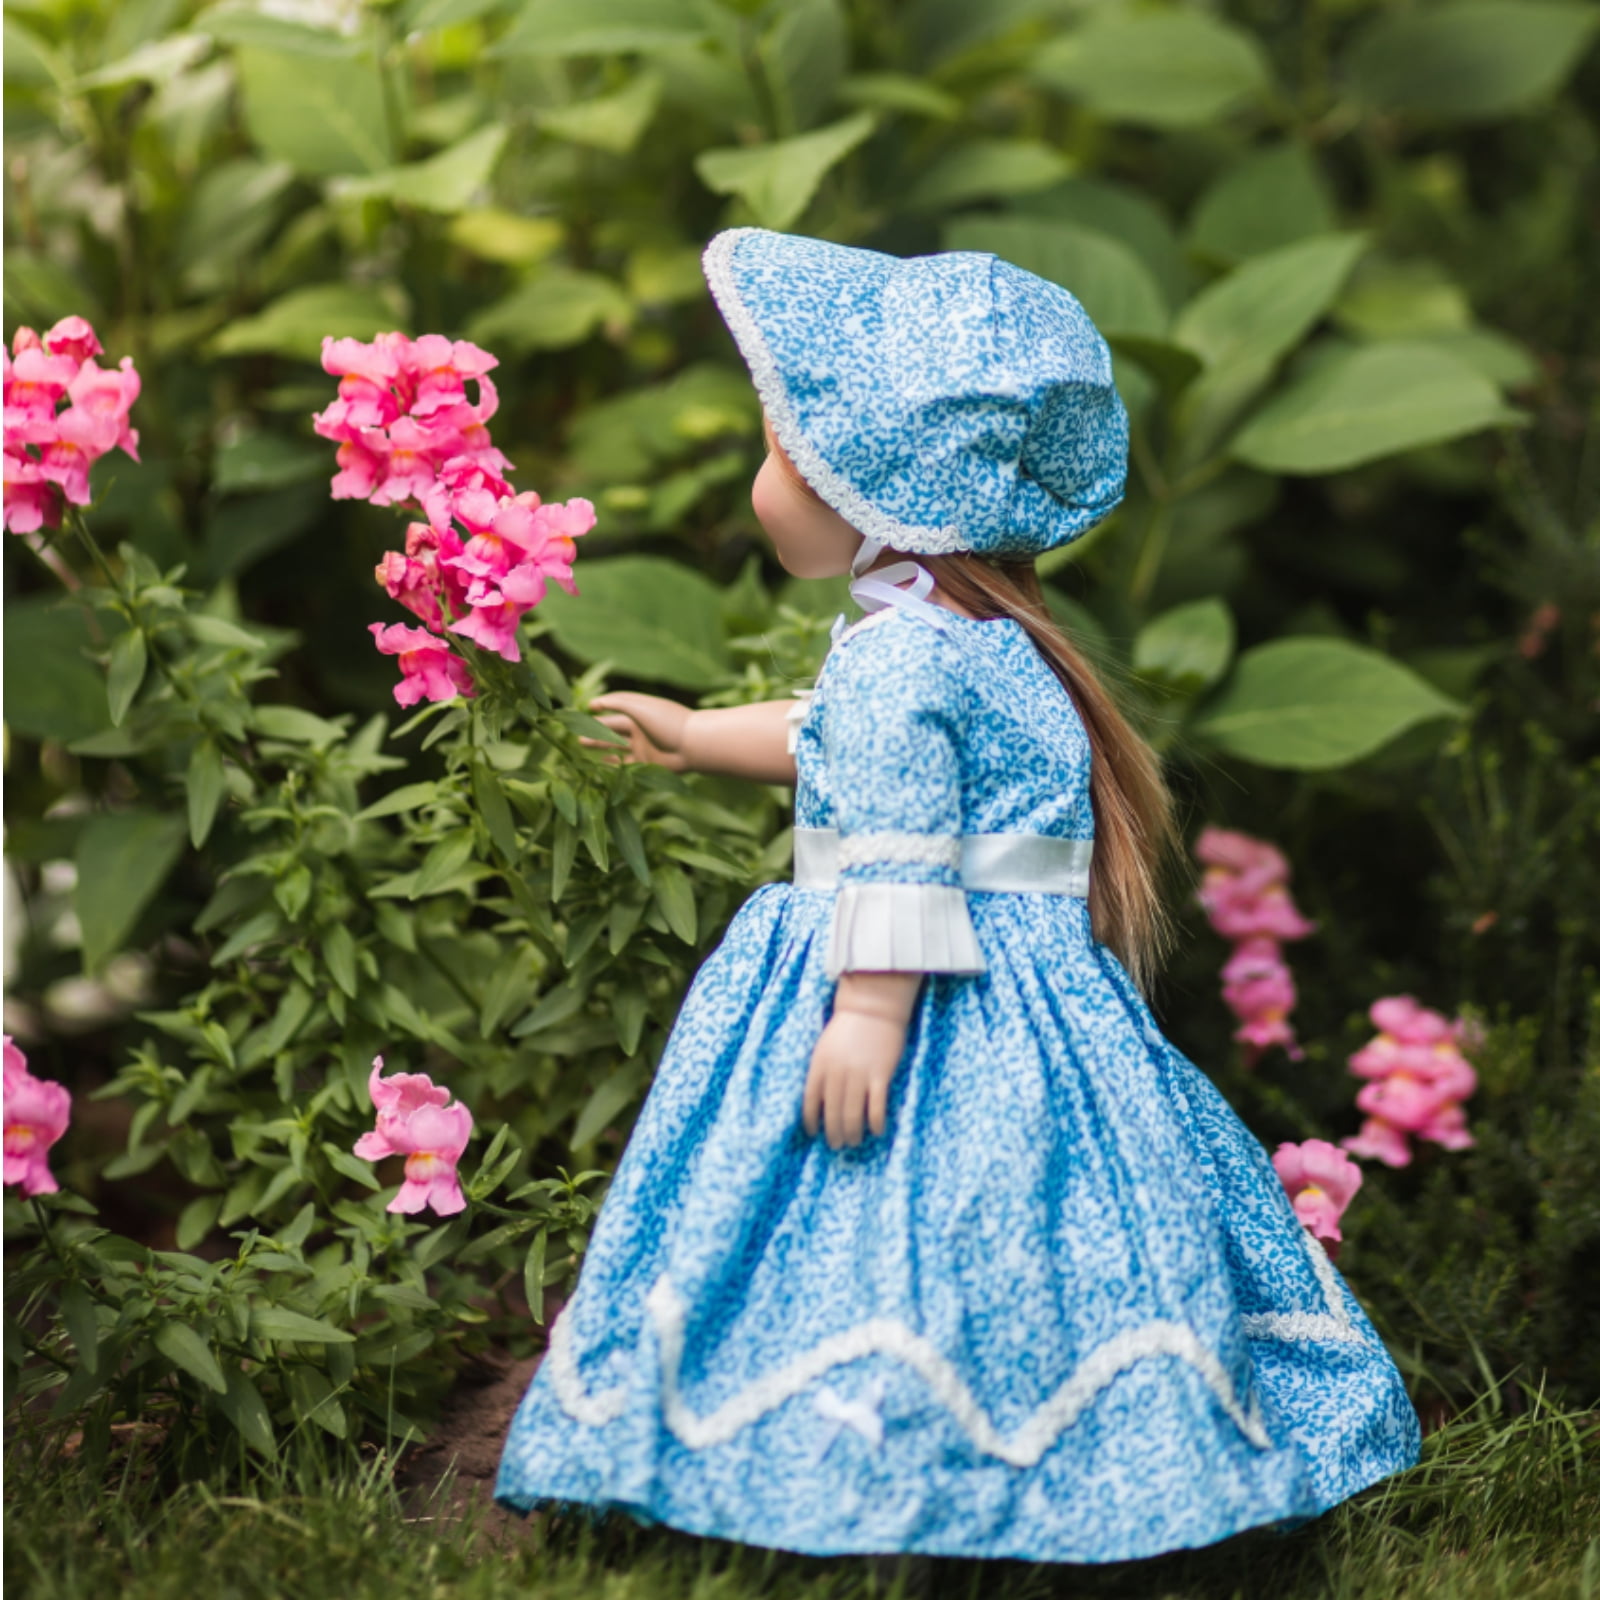 The Queen's Treasures 18 Inch Doll Clothes & Accessories, Historic